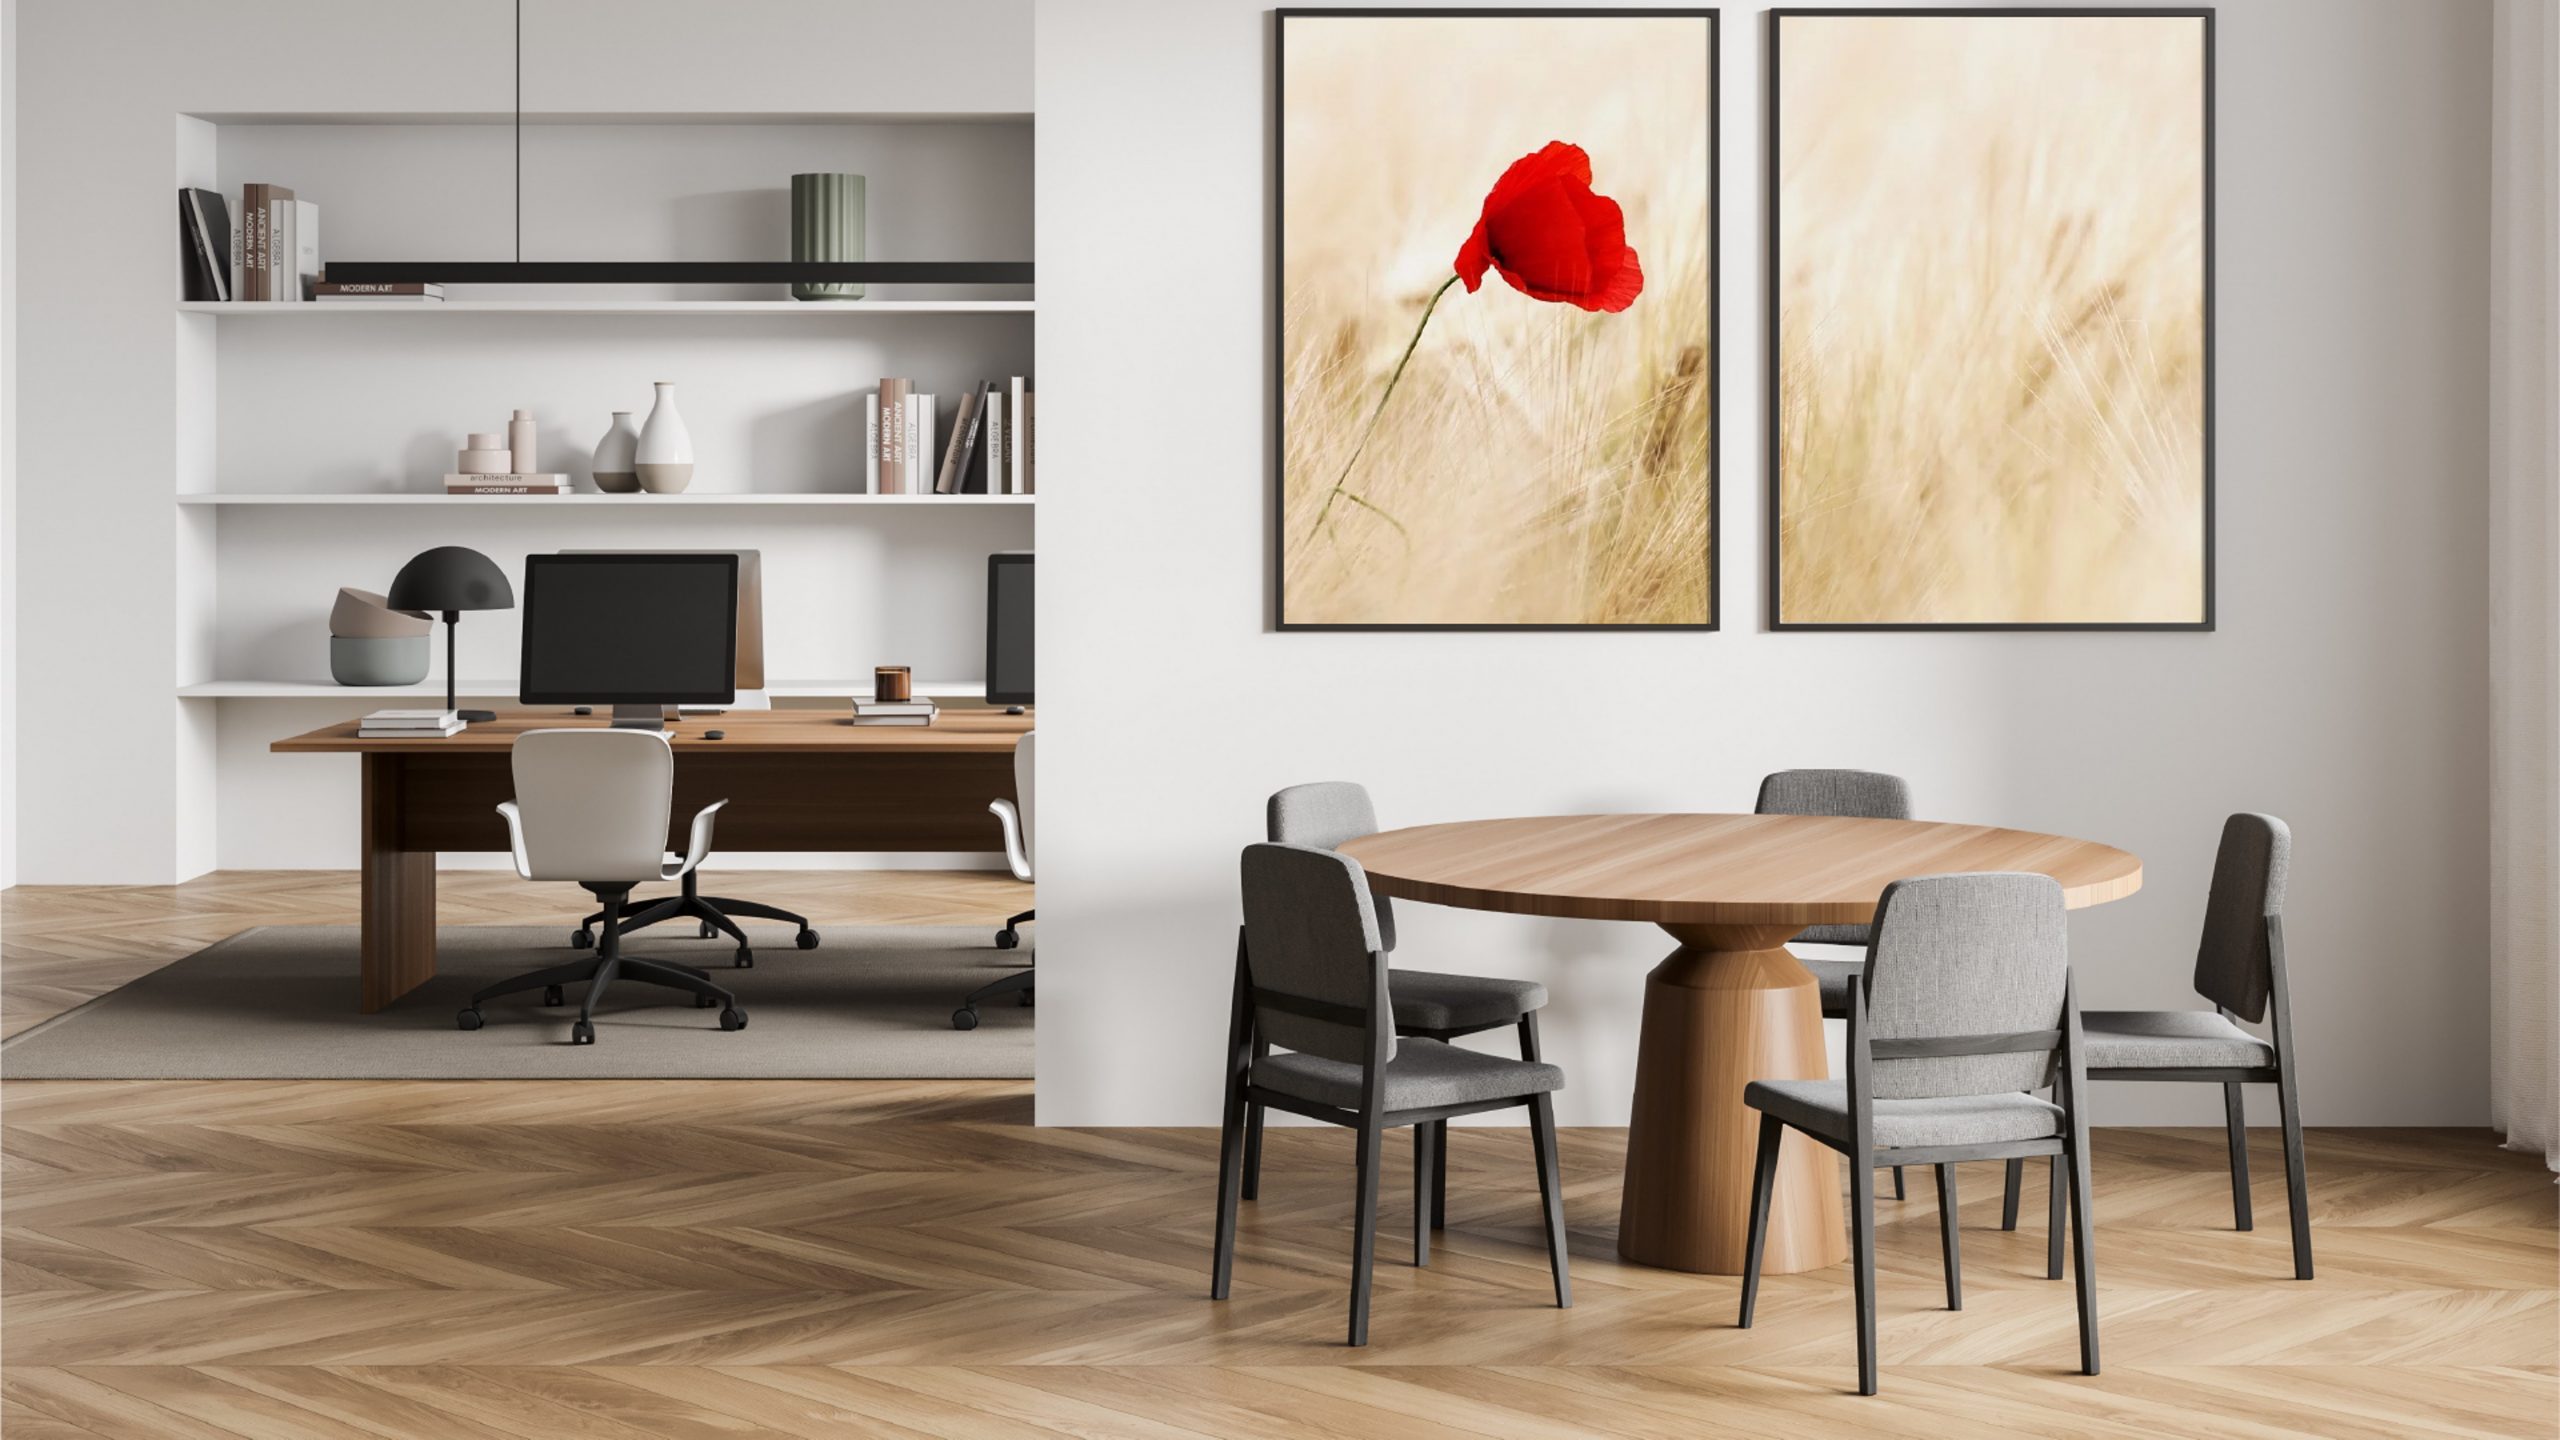 A living room with two paintings showing poppies on the wall above a dining table